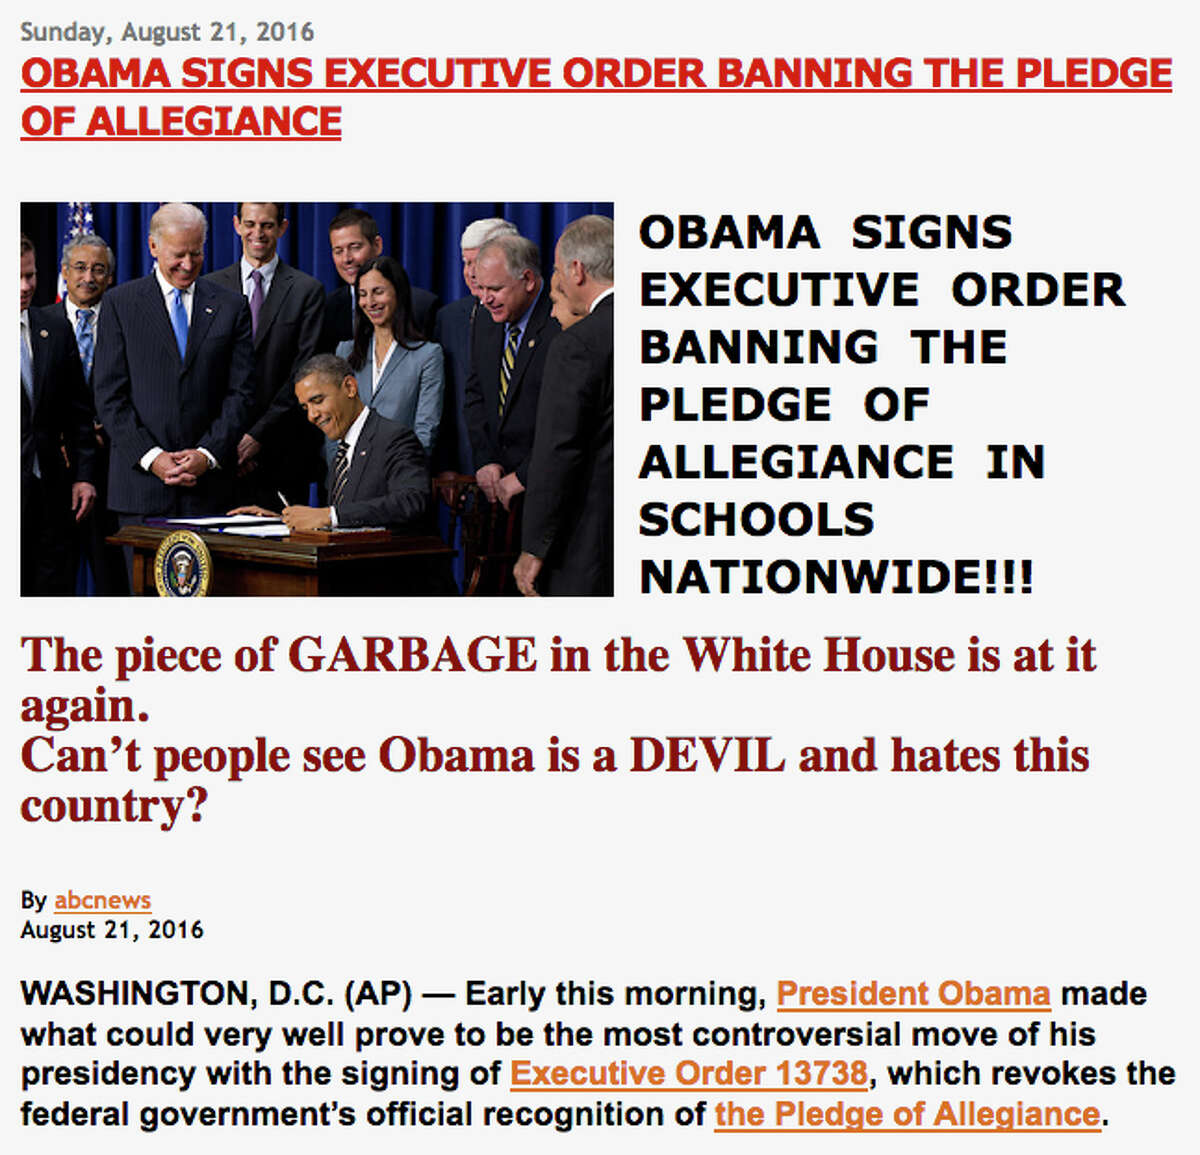 The Nesara News website contextually misrepresents The New York Times' photograph by Stephen Crowley who recorded President Barack Obama?s signing of an ethics bill, the Stop Trading on Congressional Knowledge Act, on April 4, 2012. The hateful remarks disparage Obama in this false narrative. (Screen shot by Thomas Palmer/Times Union) The article page can be viewed here: http://nesaranews.blogspot.com/2016/08/obama-signs-executive-order-banning.html